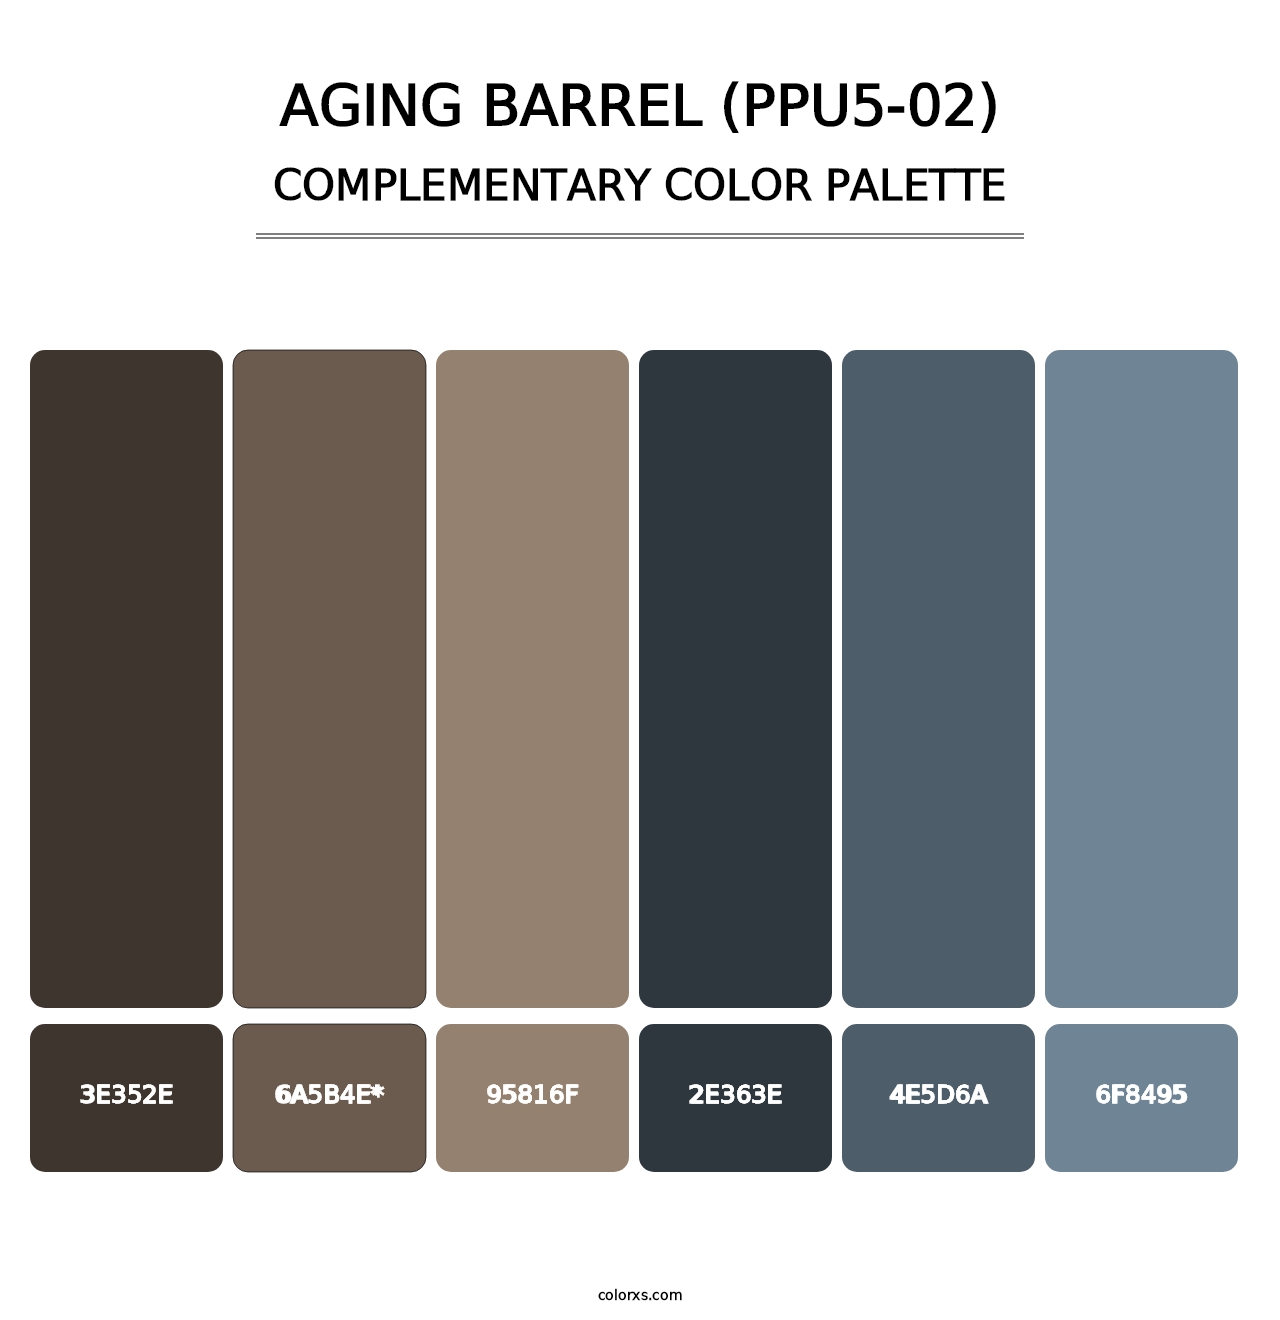 Aging Barrel (PPU5-02) - Complementary Color Palette